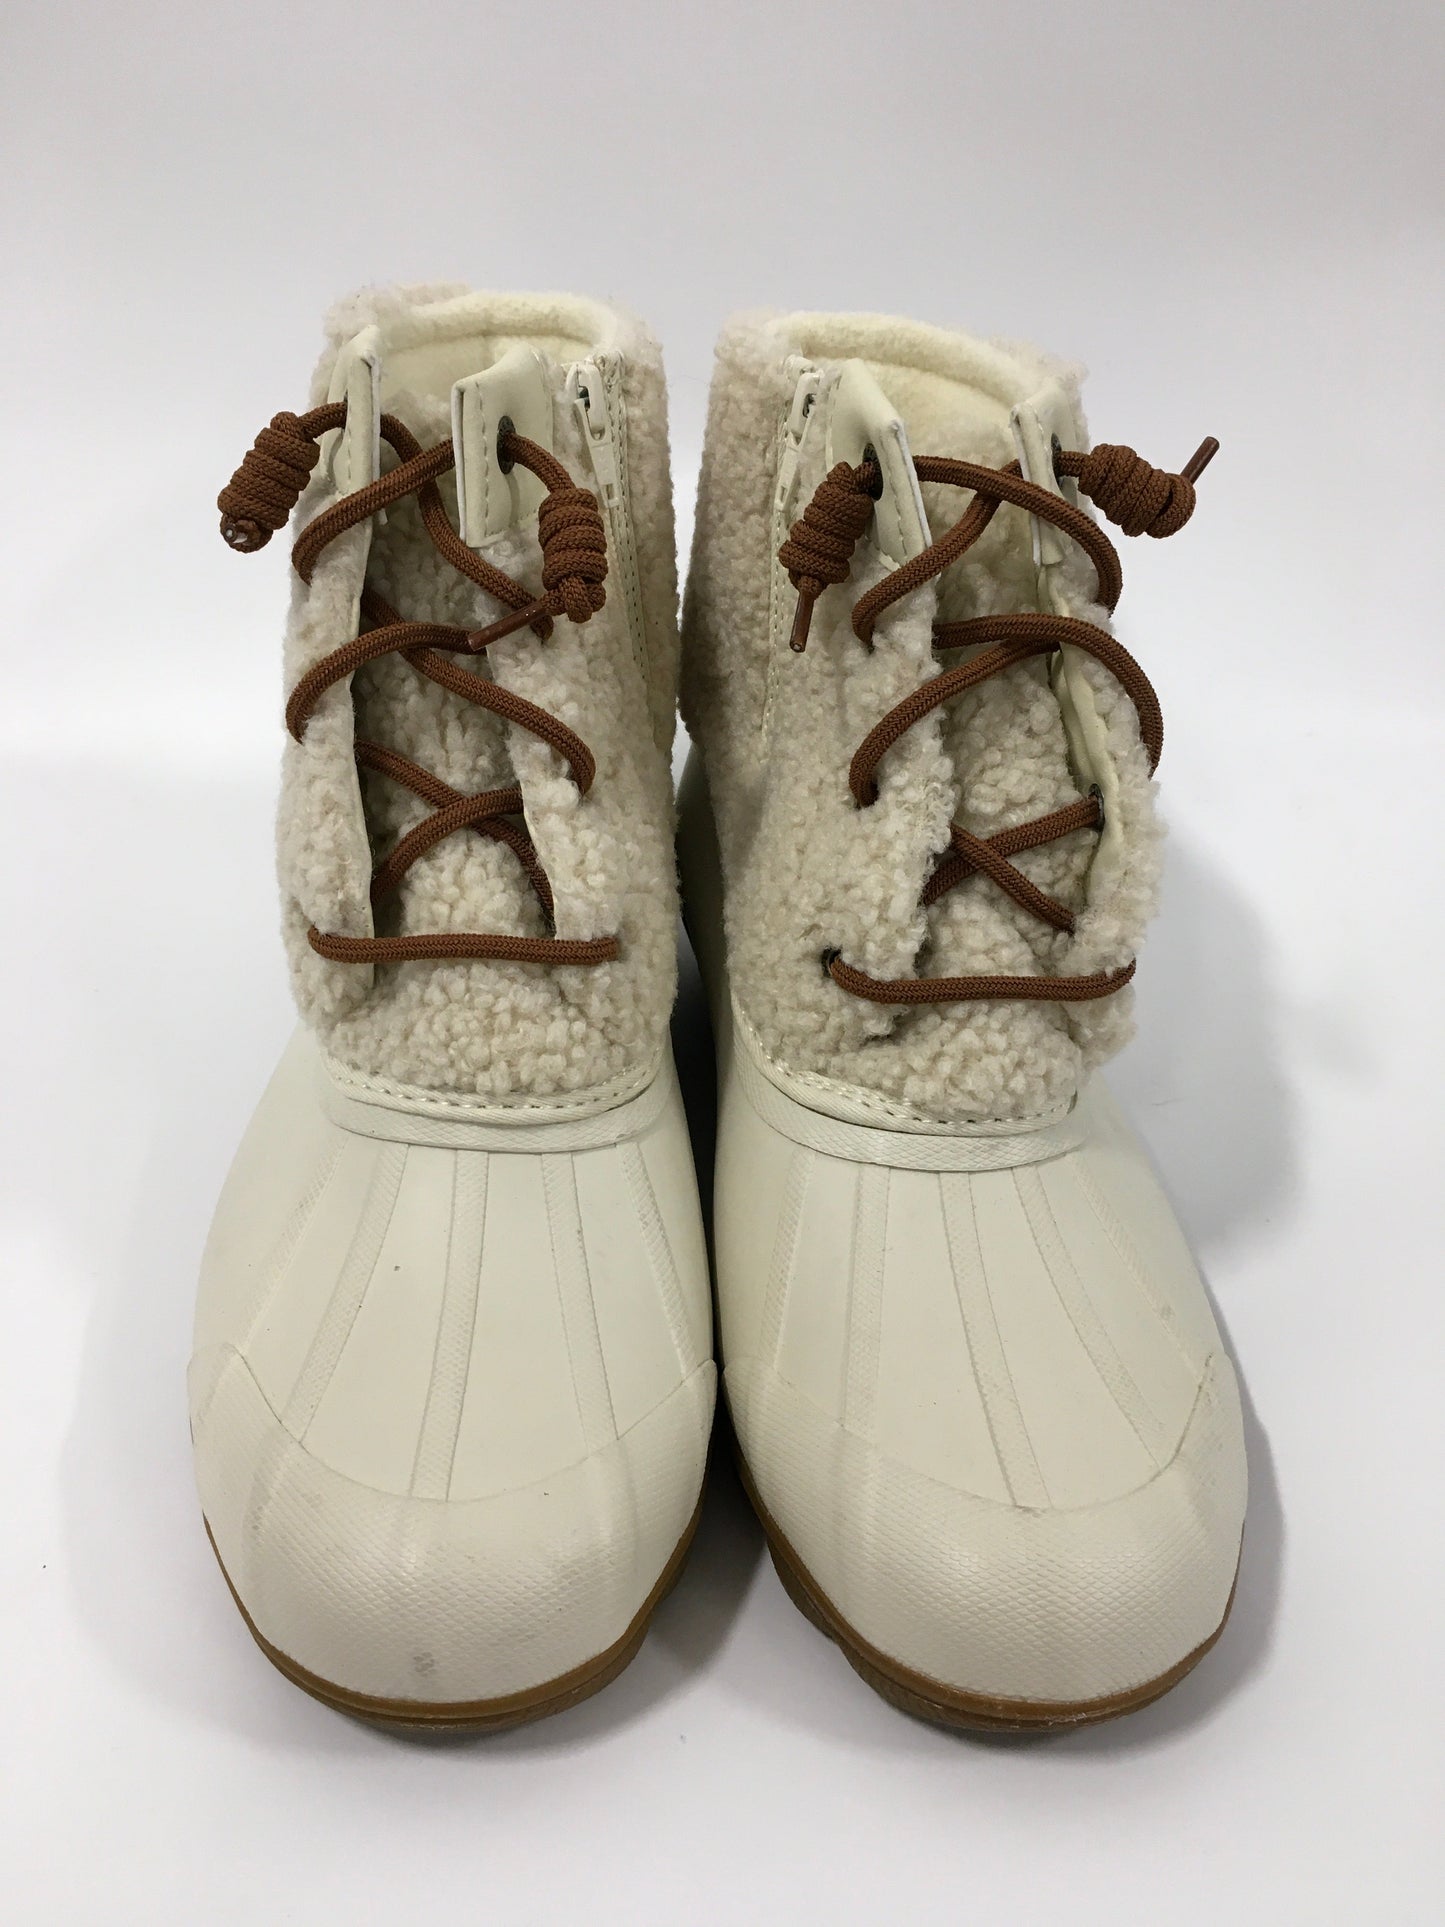 White Boots Snow Sperry, Size 8.5